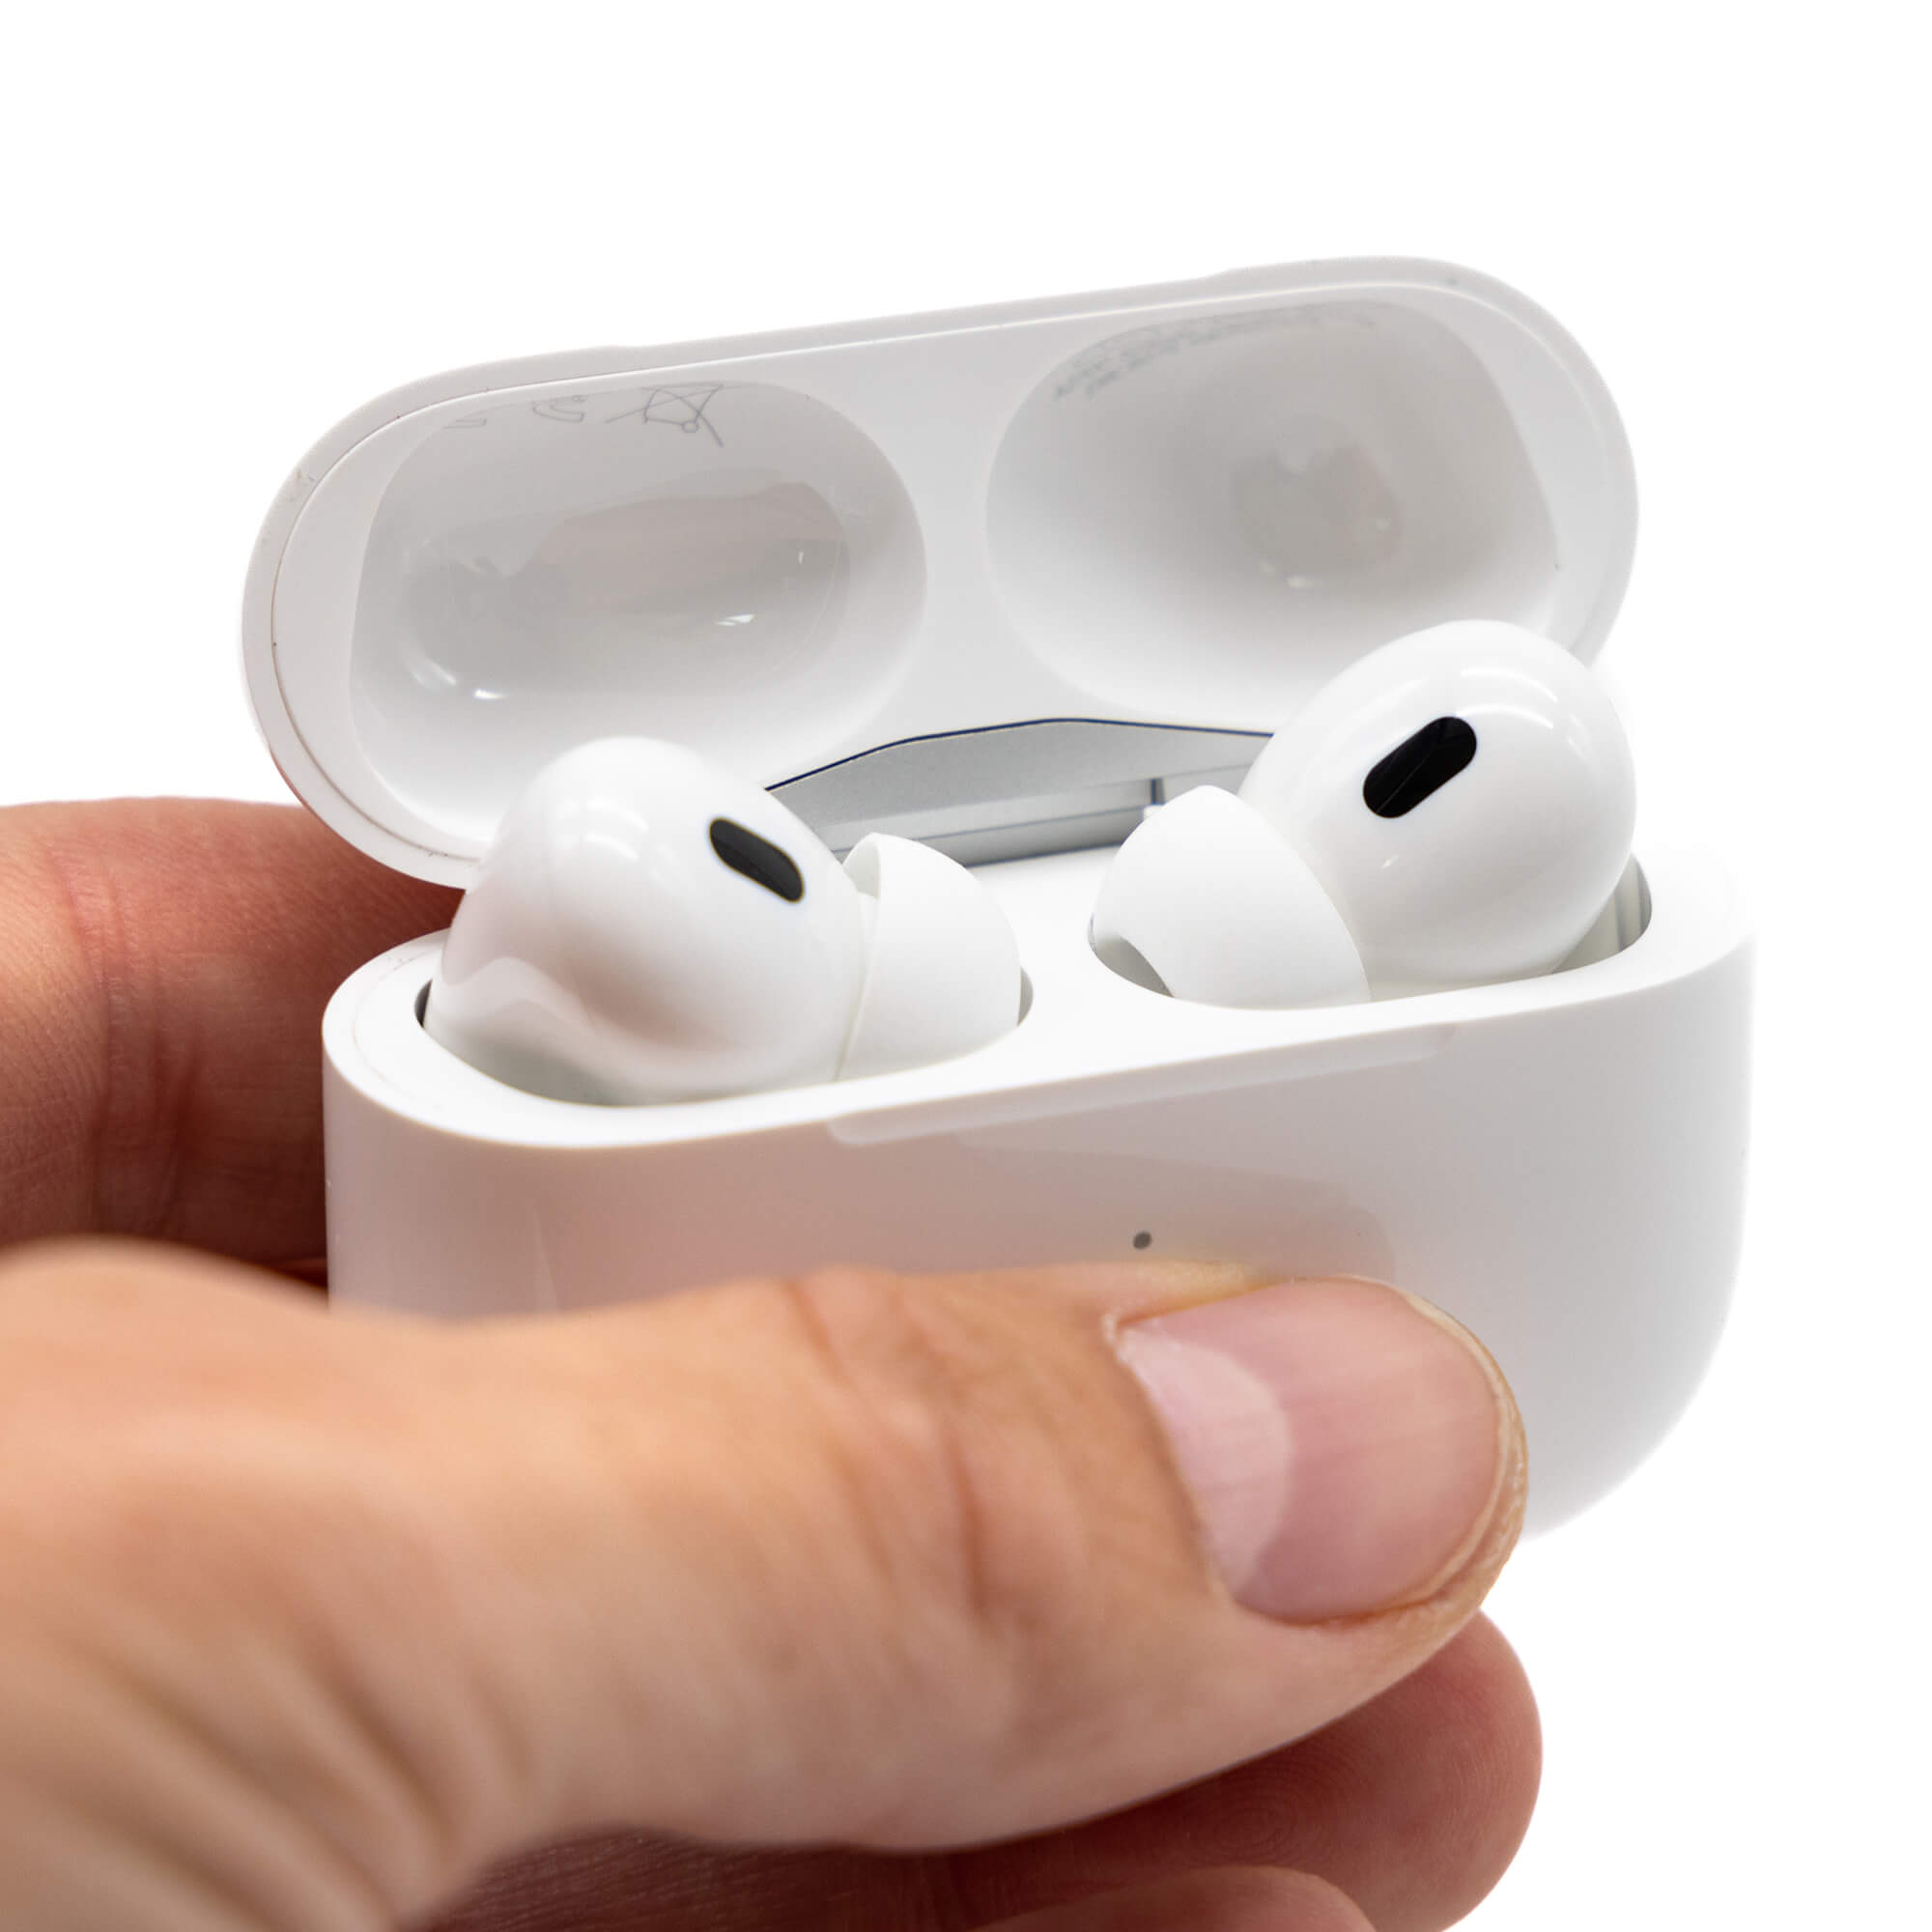 Apple Airpods Pro 1st Generation w/ MagSafe Wireless Charging Case  (Certified Refurbished)